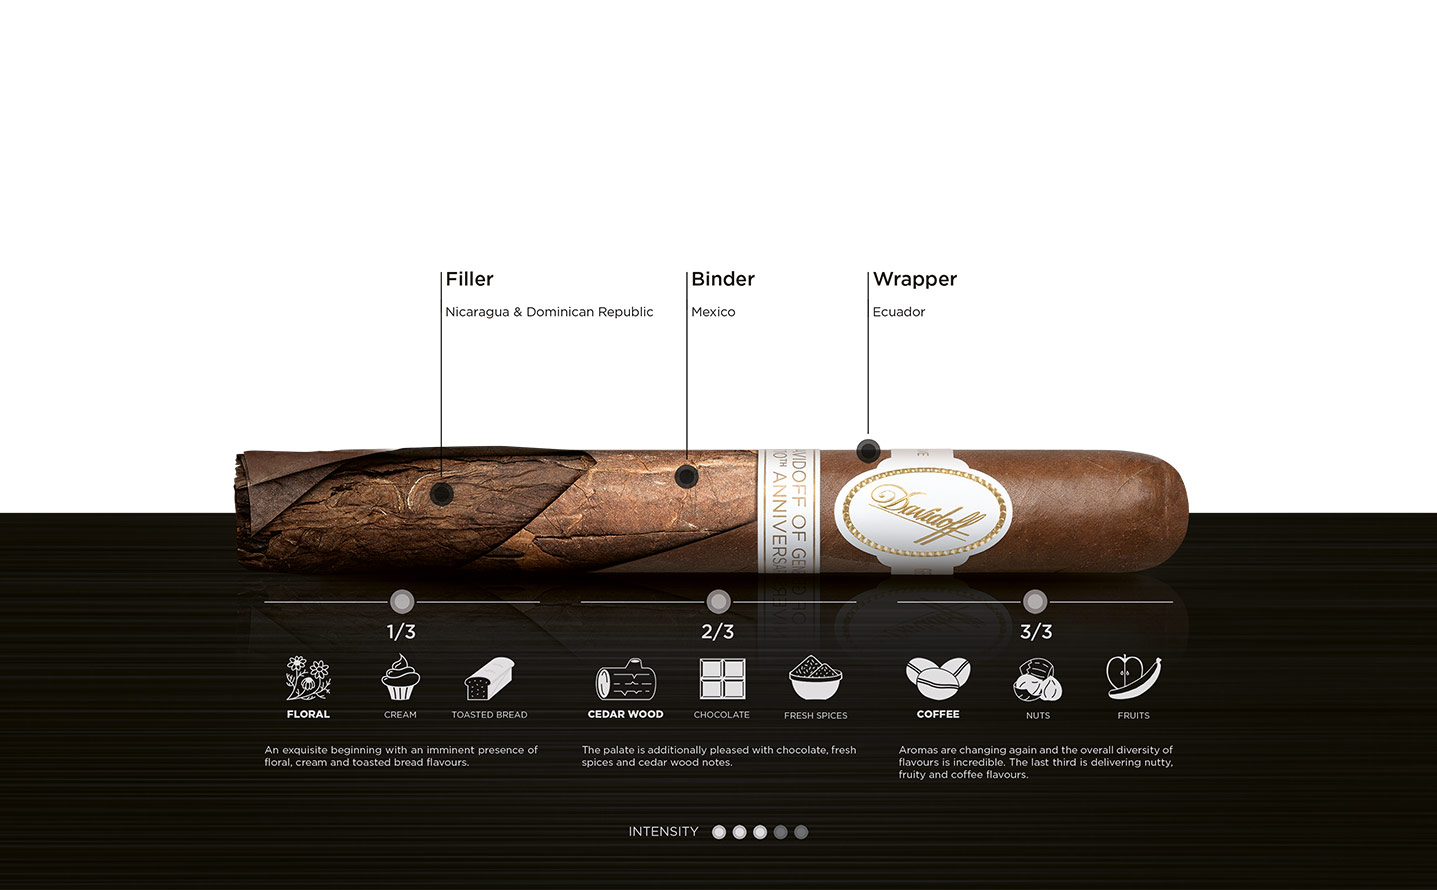 Taste of the Davidoff Geneva Exclusive cigar: floral, creme, toasted bread, cedar wood, chocolate, spices, coffee, nuts, fruits.